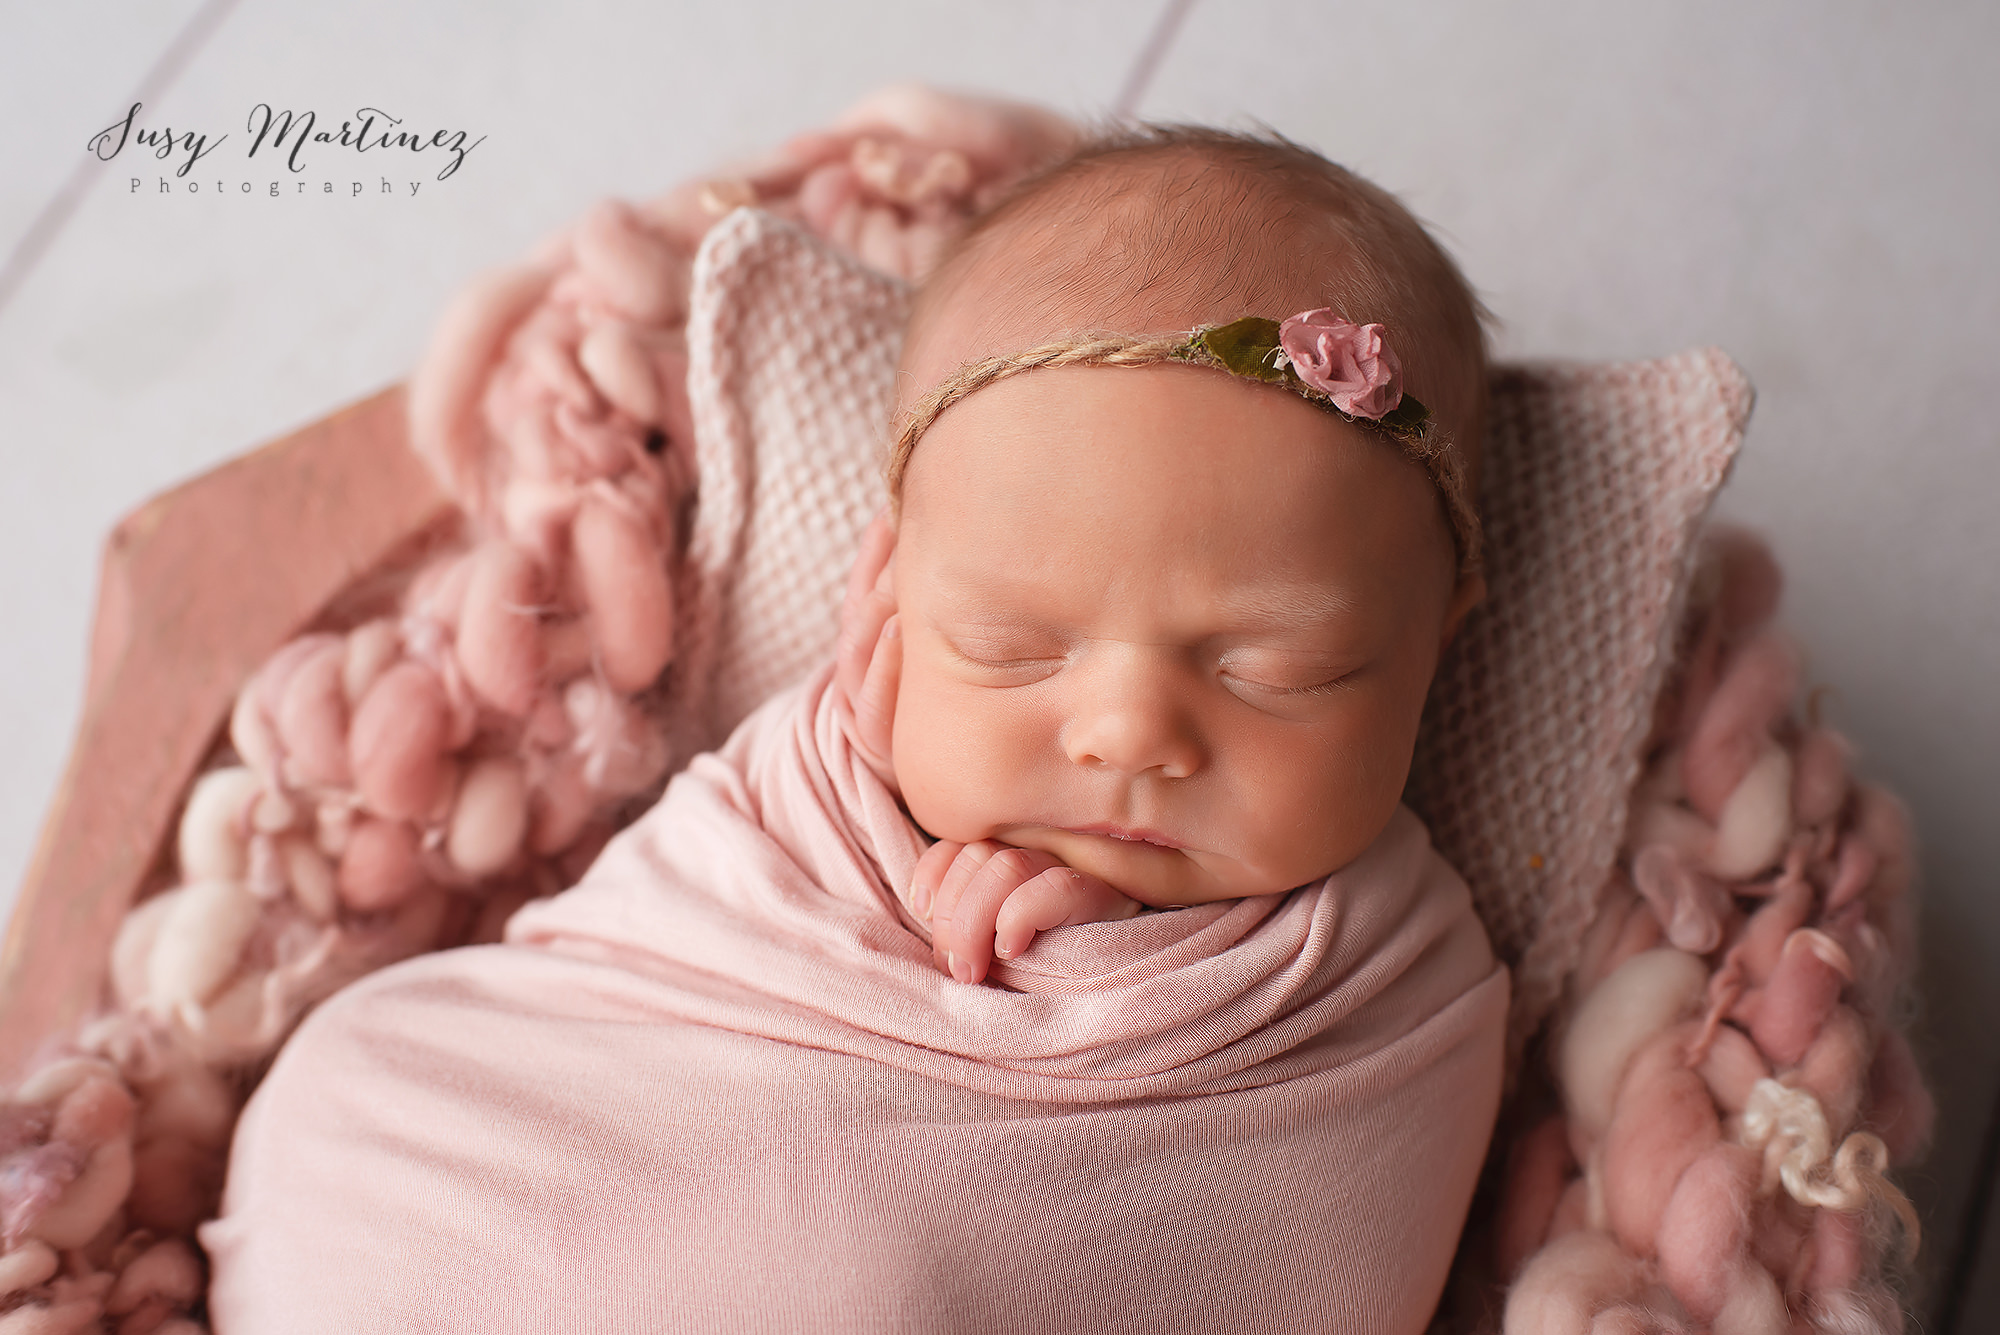 baby sleeps in pink wrap curled up on knit blanket